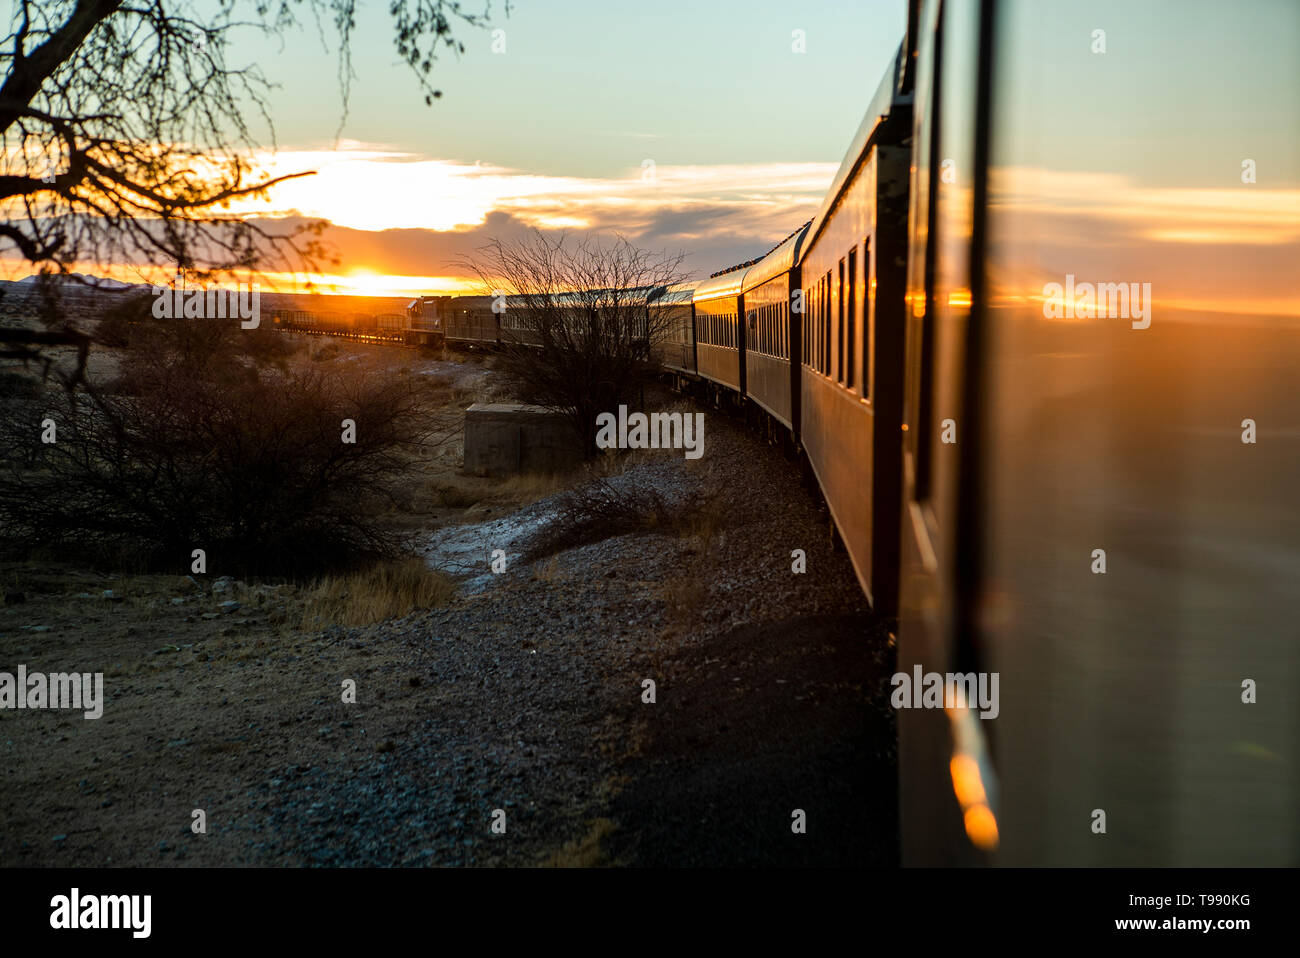 African Explorer, treno speciale, Namibia, Africa Foto Stock